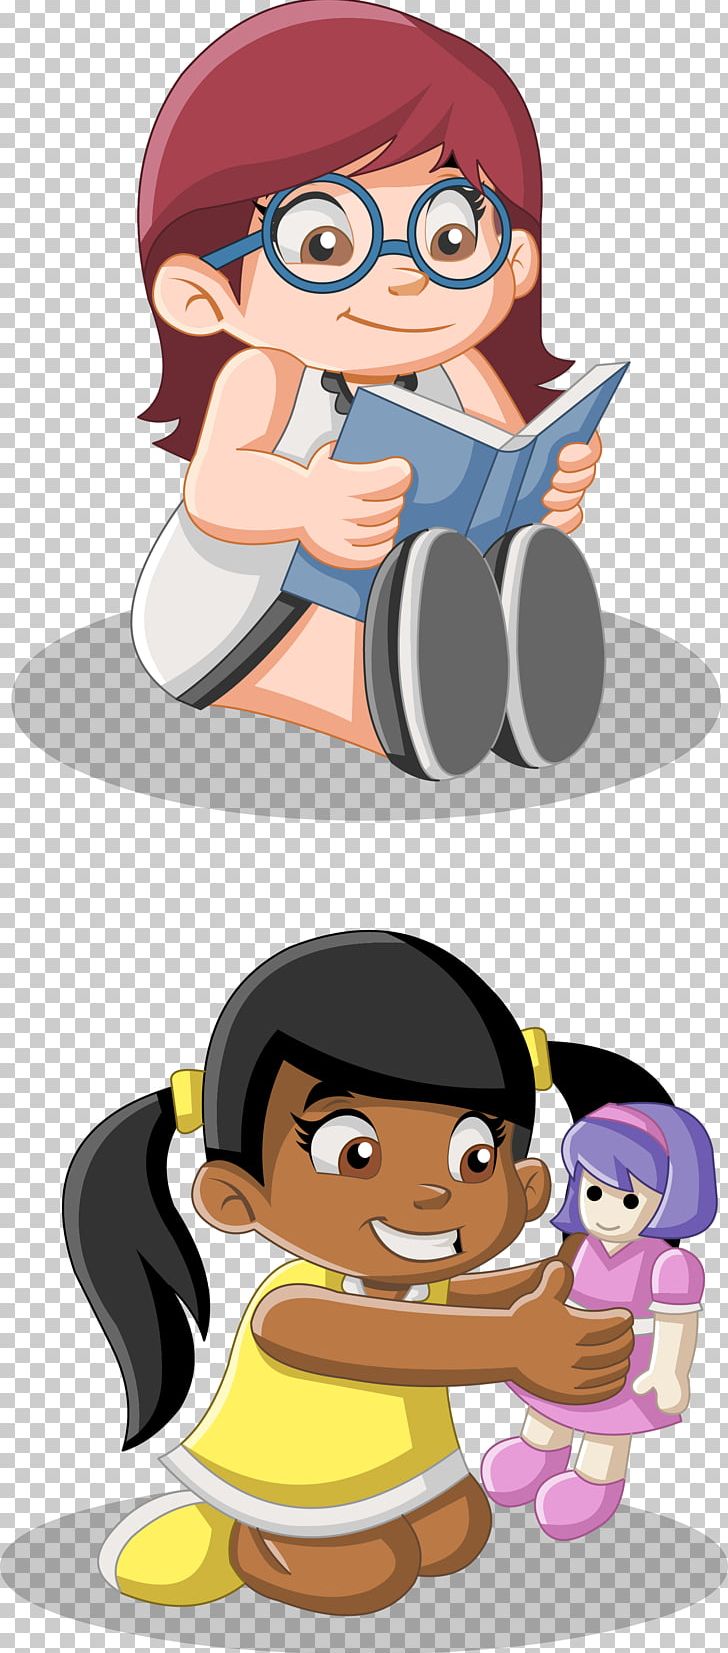 Cartoon Photography Girl Illustration PNG, Clipart, Art, Baby, Boy, Cartoon Eyes, Child Free PNG Download